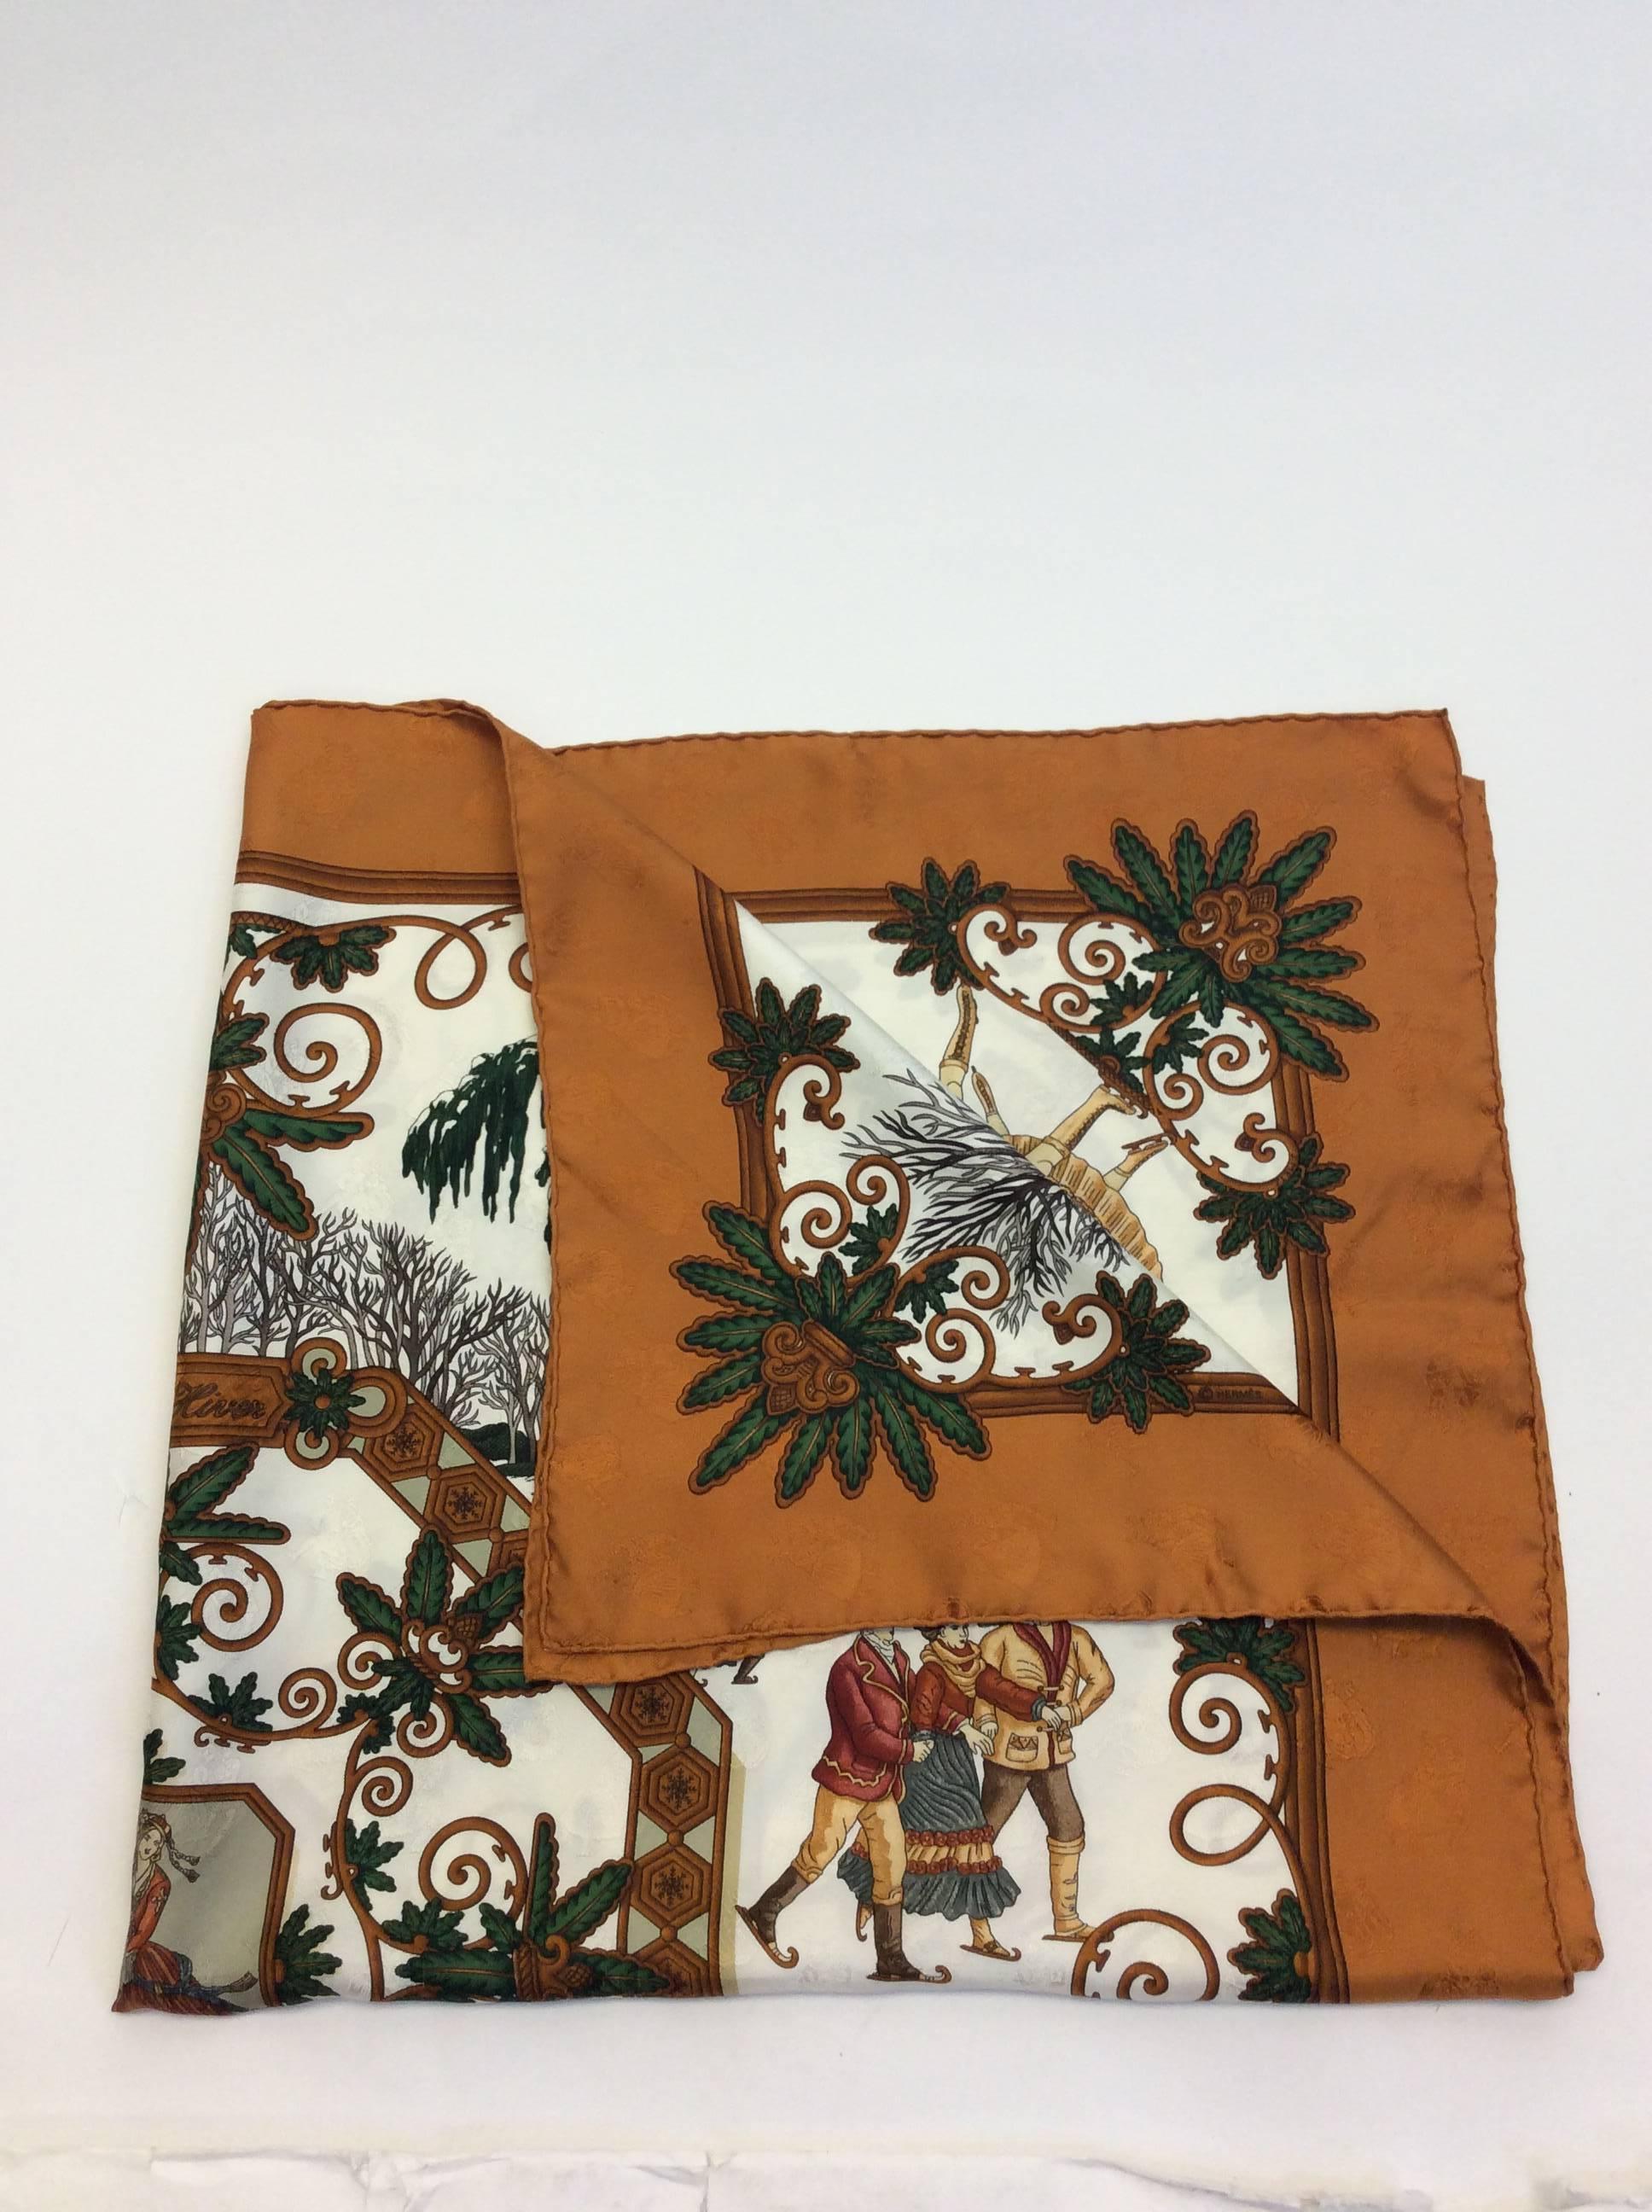 Hermes Colonial Printed Silk Scarf In Excellent Condition For Sale In Narberth, PA